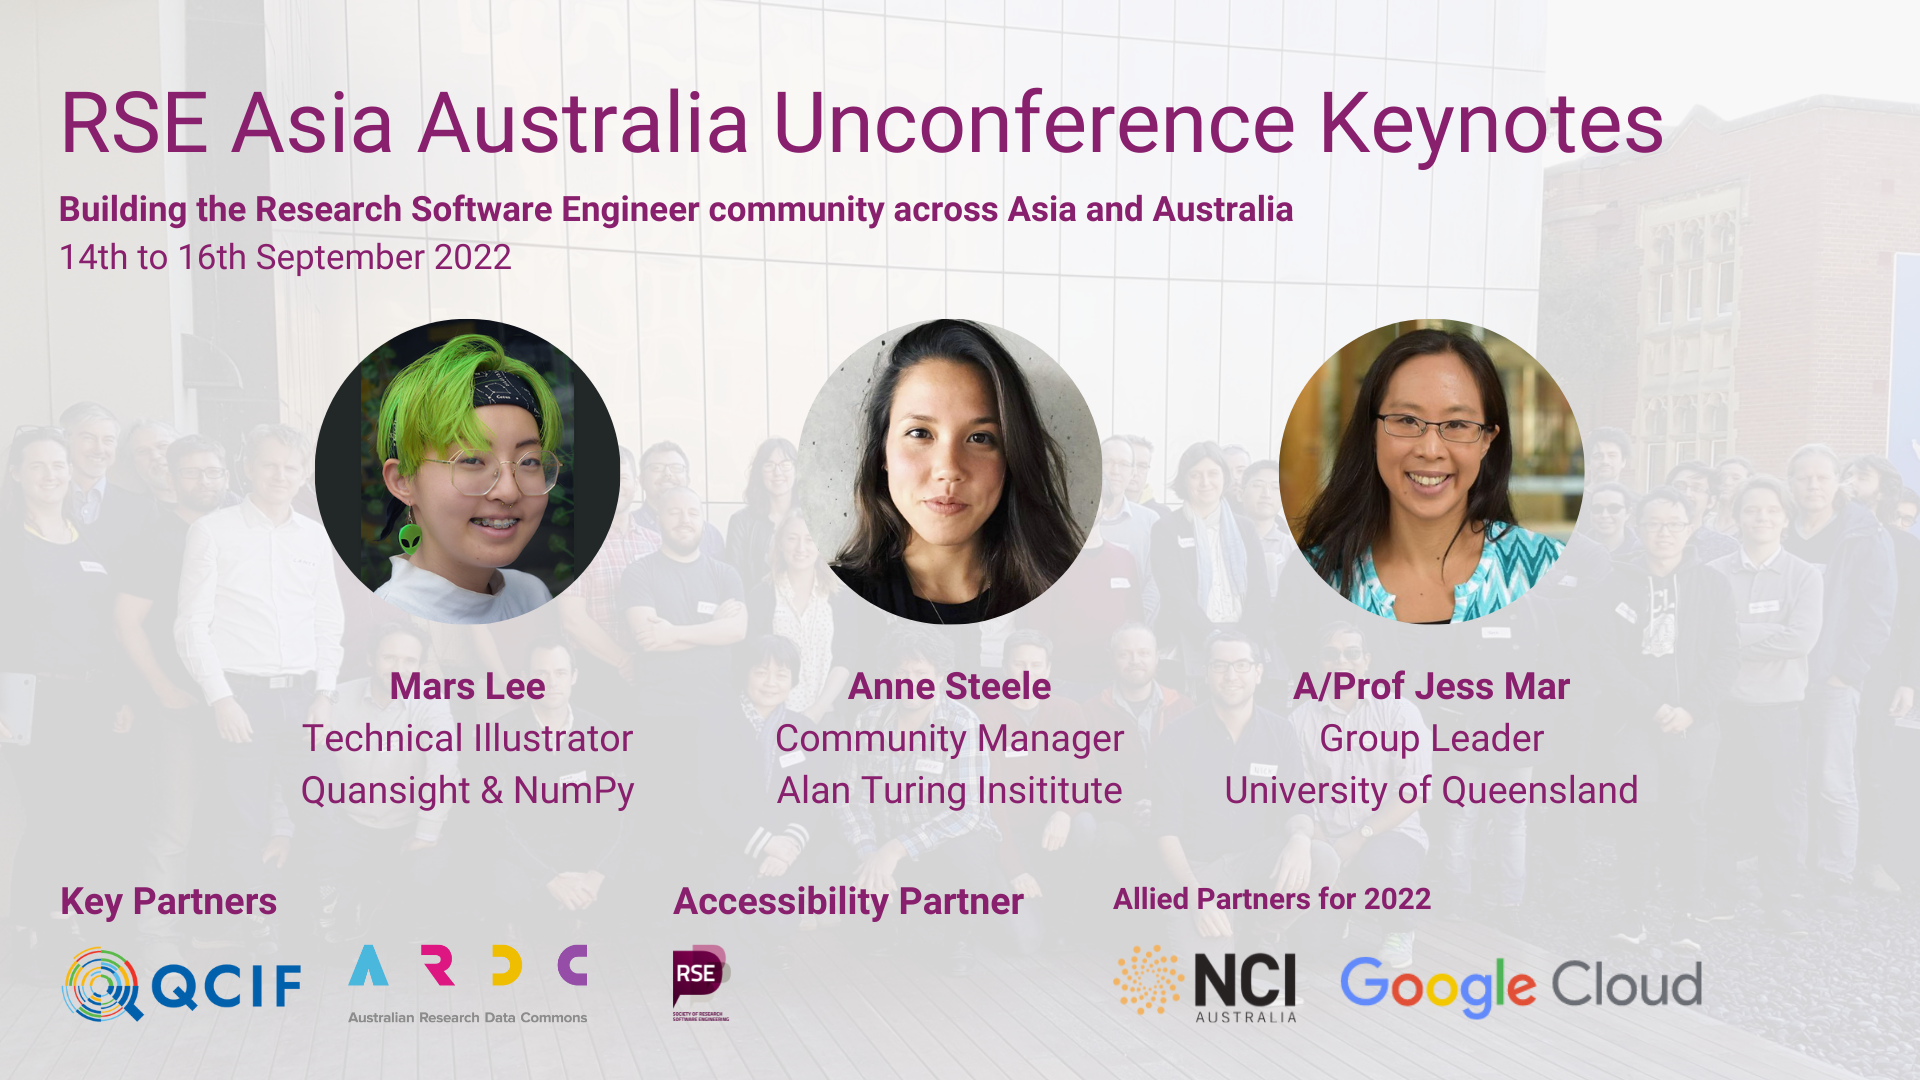 Keynotes of RSE Asia Australia conference 2022 - building the research software community across Asia and Australia 